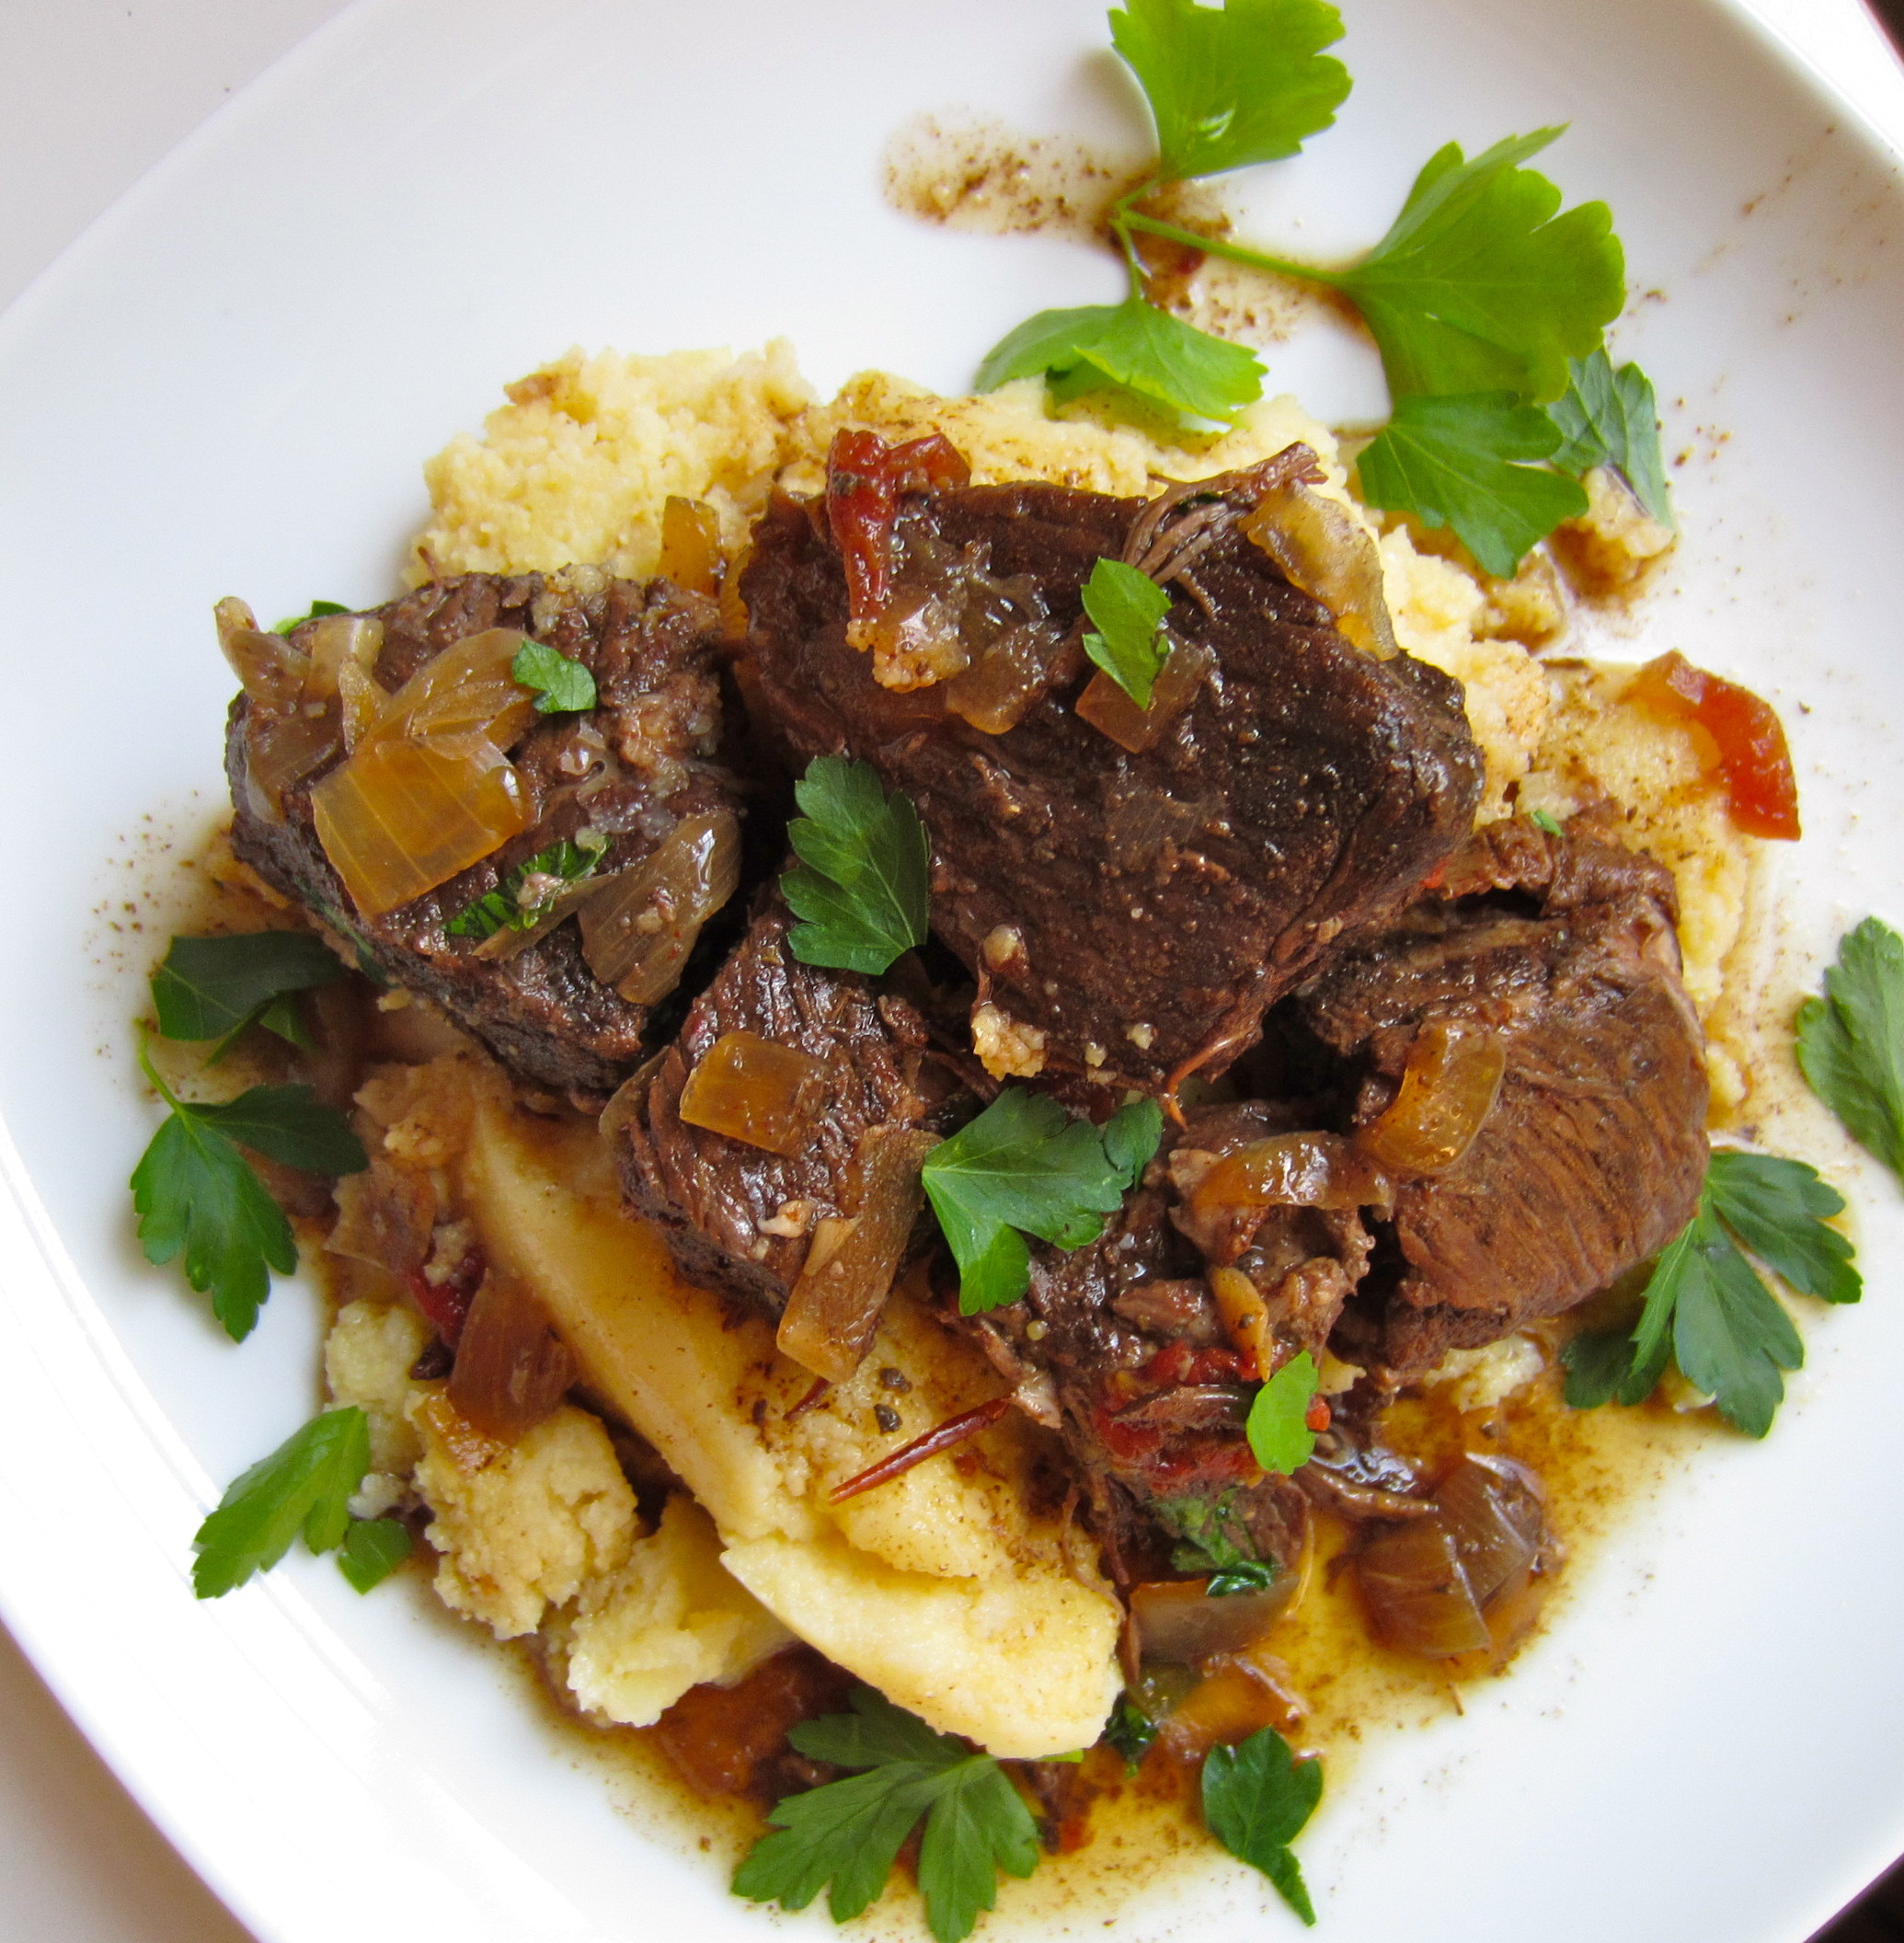 Beef Short Ribs In Crock Pot
 Crock Pot Beef Short Ribs with Ancho Chiles and Polenta